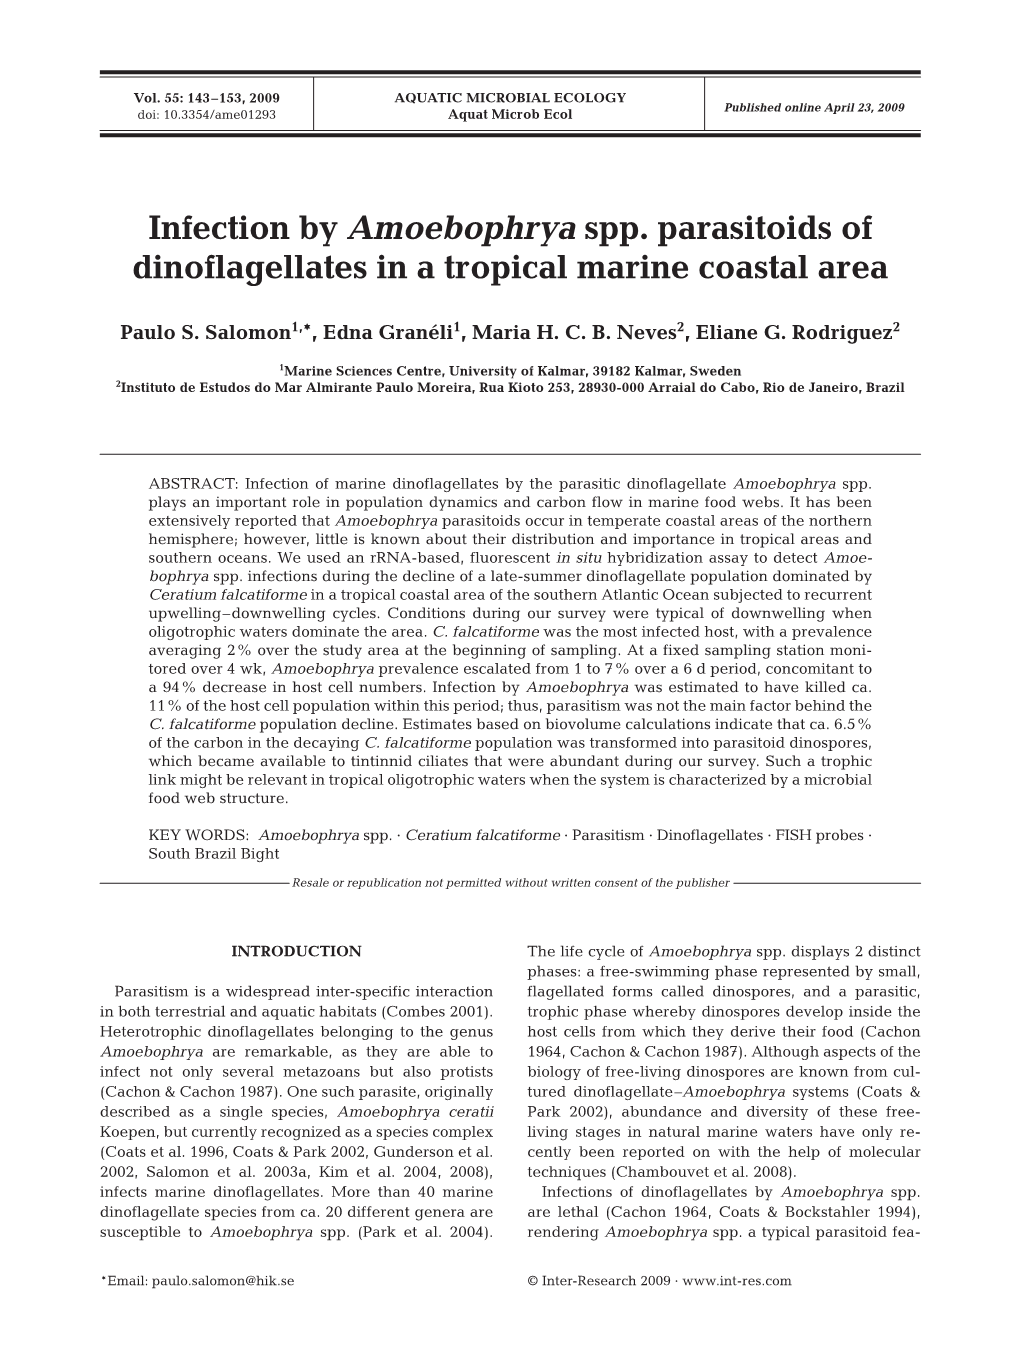 Infection by Amoebophrya Spp. Parasitoids of Dinoflagellates in a Tropical Marine Coastal Area